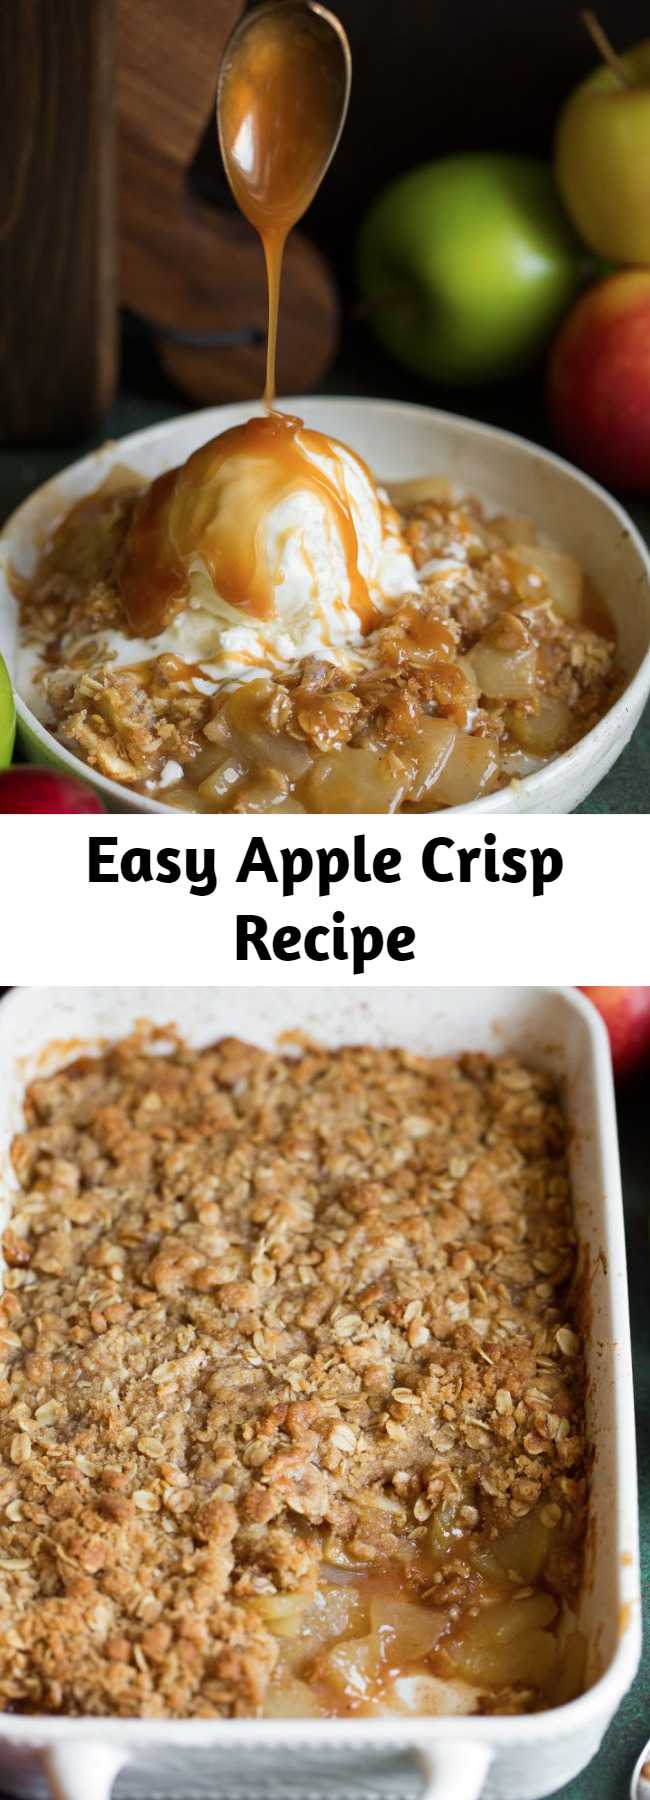 Easy Apple Crisp Recipe - This is hands down the best apple crisp recipe you’ll try! Definitely a family favorite. It's brimming with fresh juicy apples, it has the perfect amount of cinnamon sweetness, and that crisp buttery oat topping is what dreams are made of! #applecrisp #apple #dessert #recipe